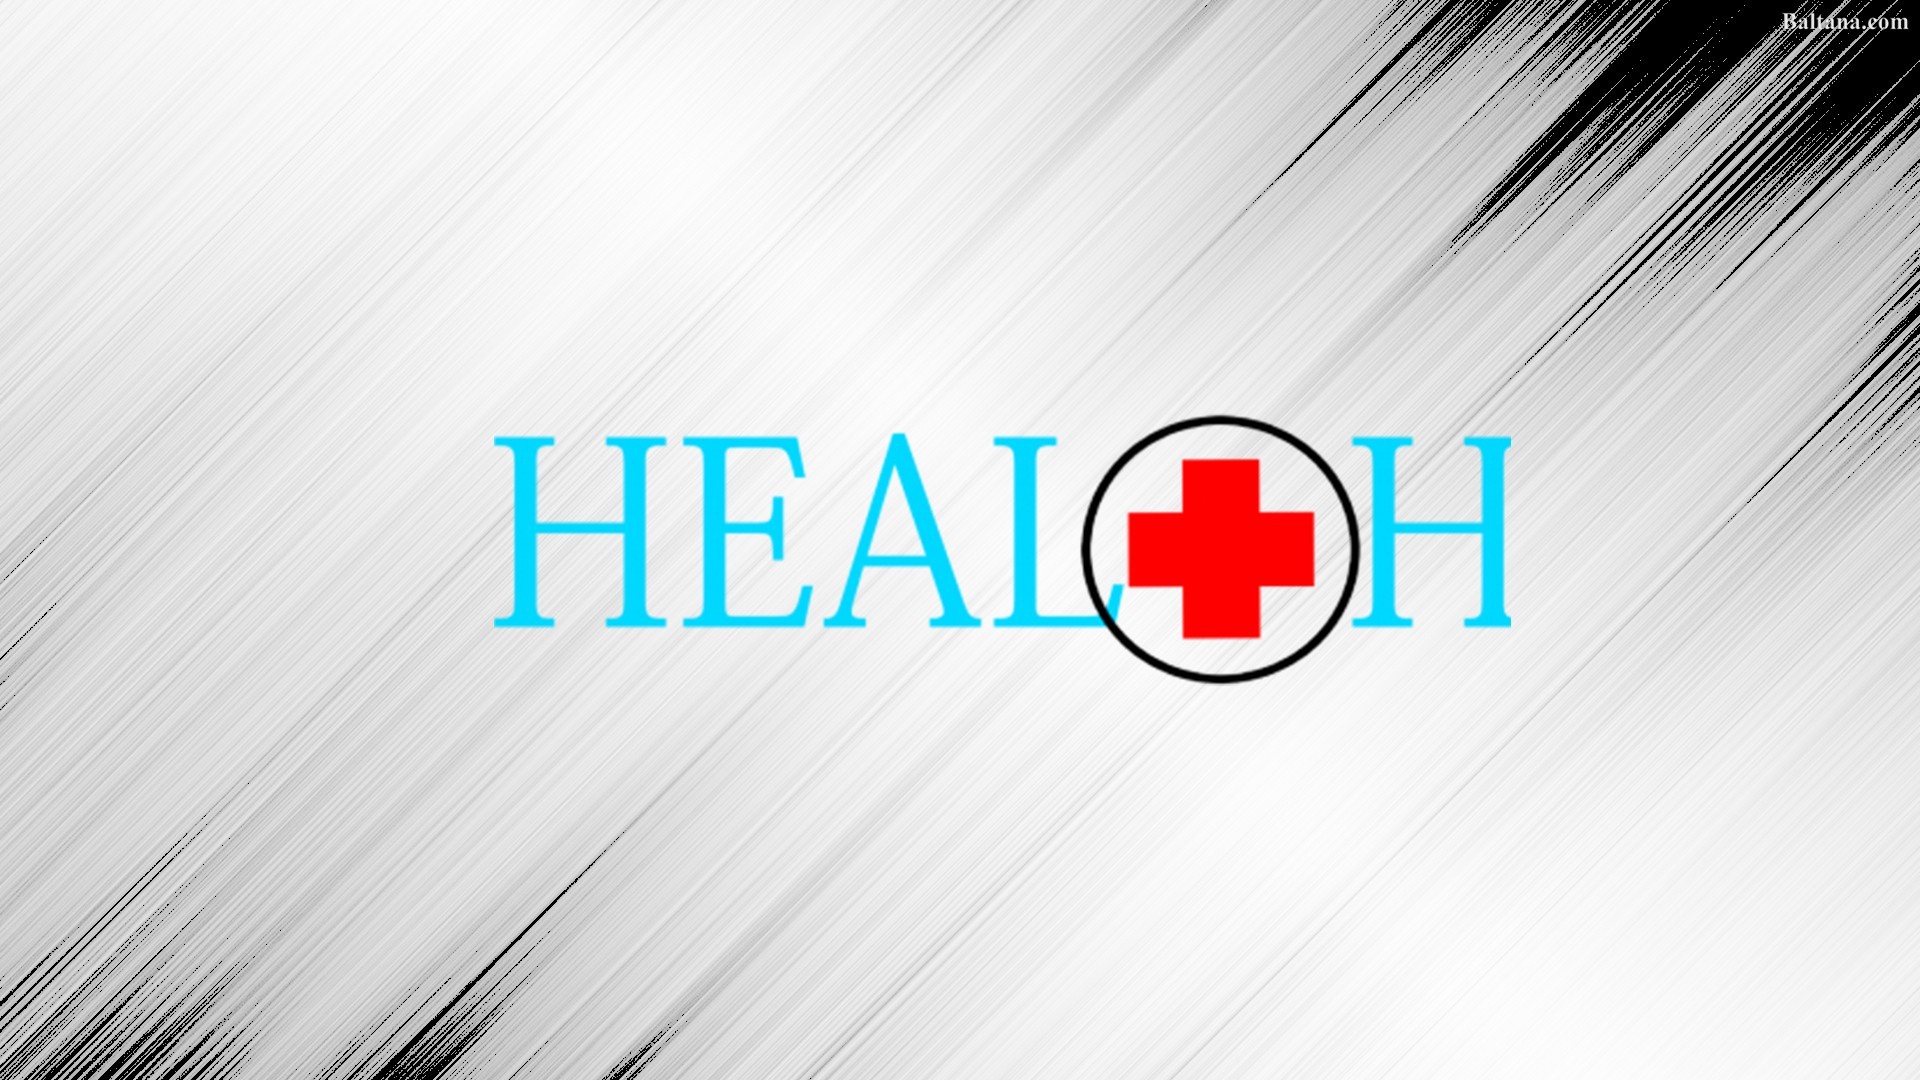 Health Wallpapers